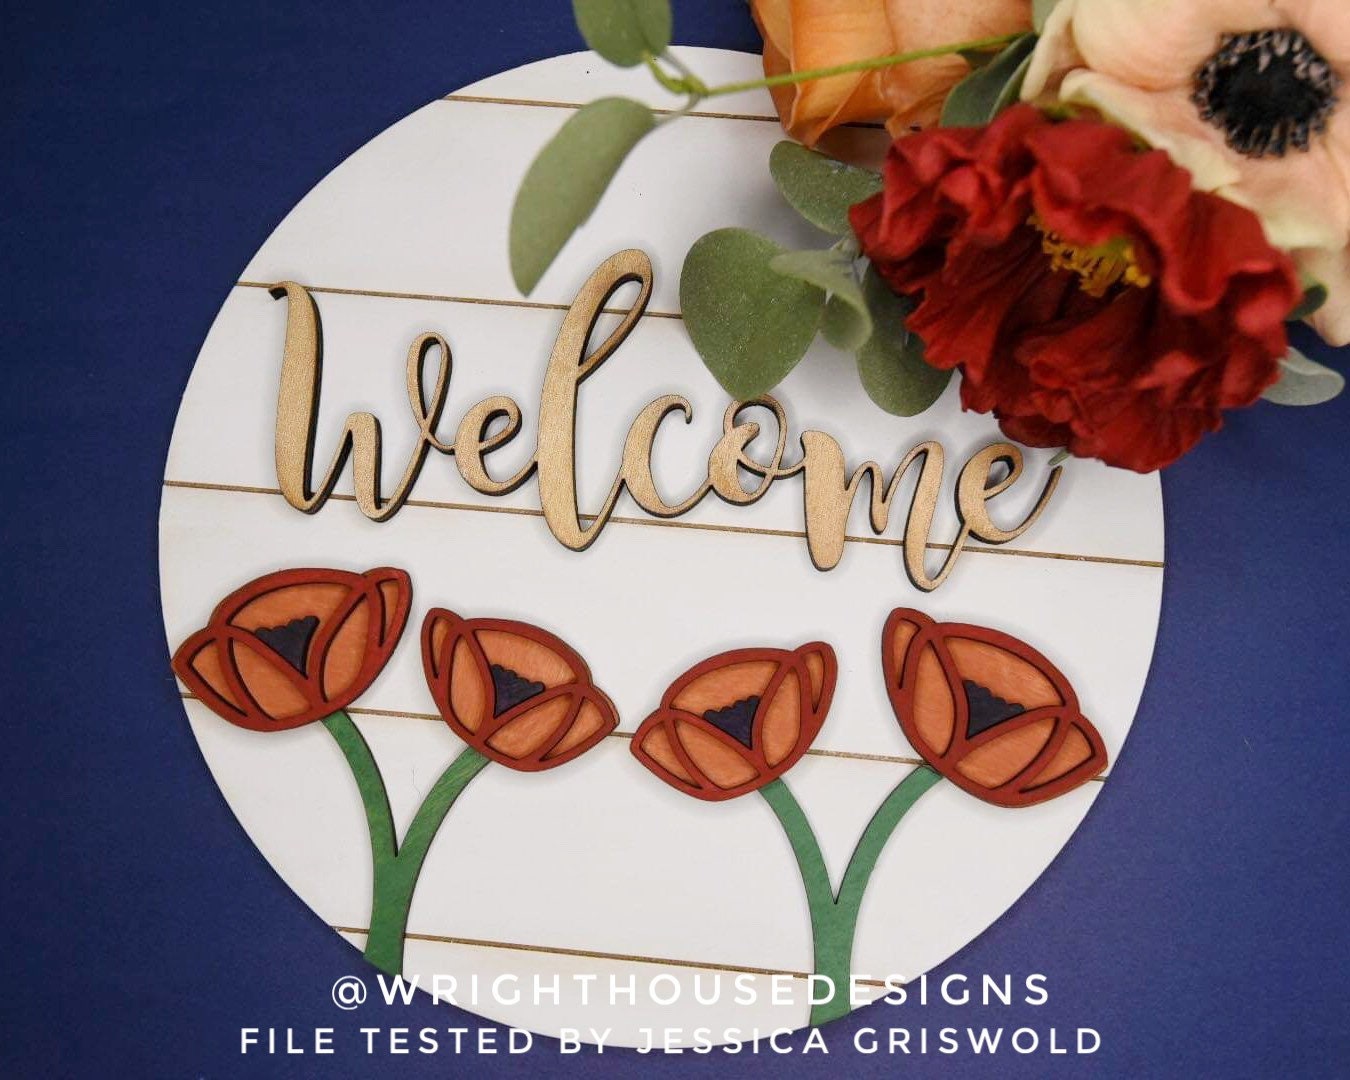 Poppy Flower Simple Floral Shelf Sitter Sign - Round Sign Making and DIY Kits - Beginner Cut File For Glowforge Lasers - Digital SVG File